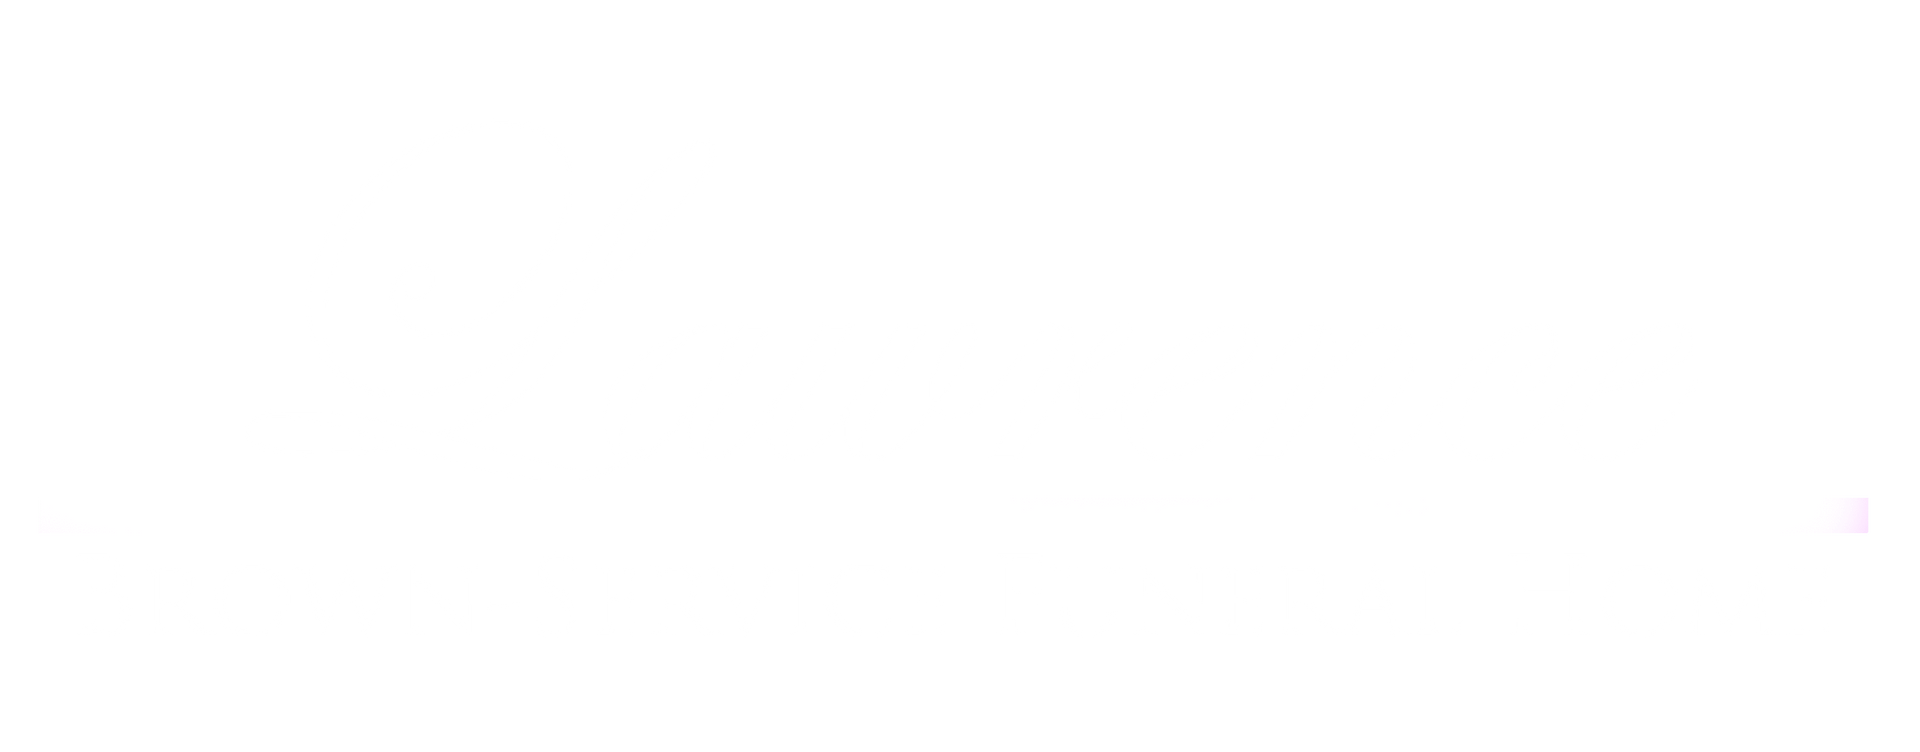 Lawrence Brown Service Funeral Home Logo